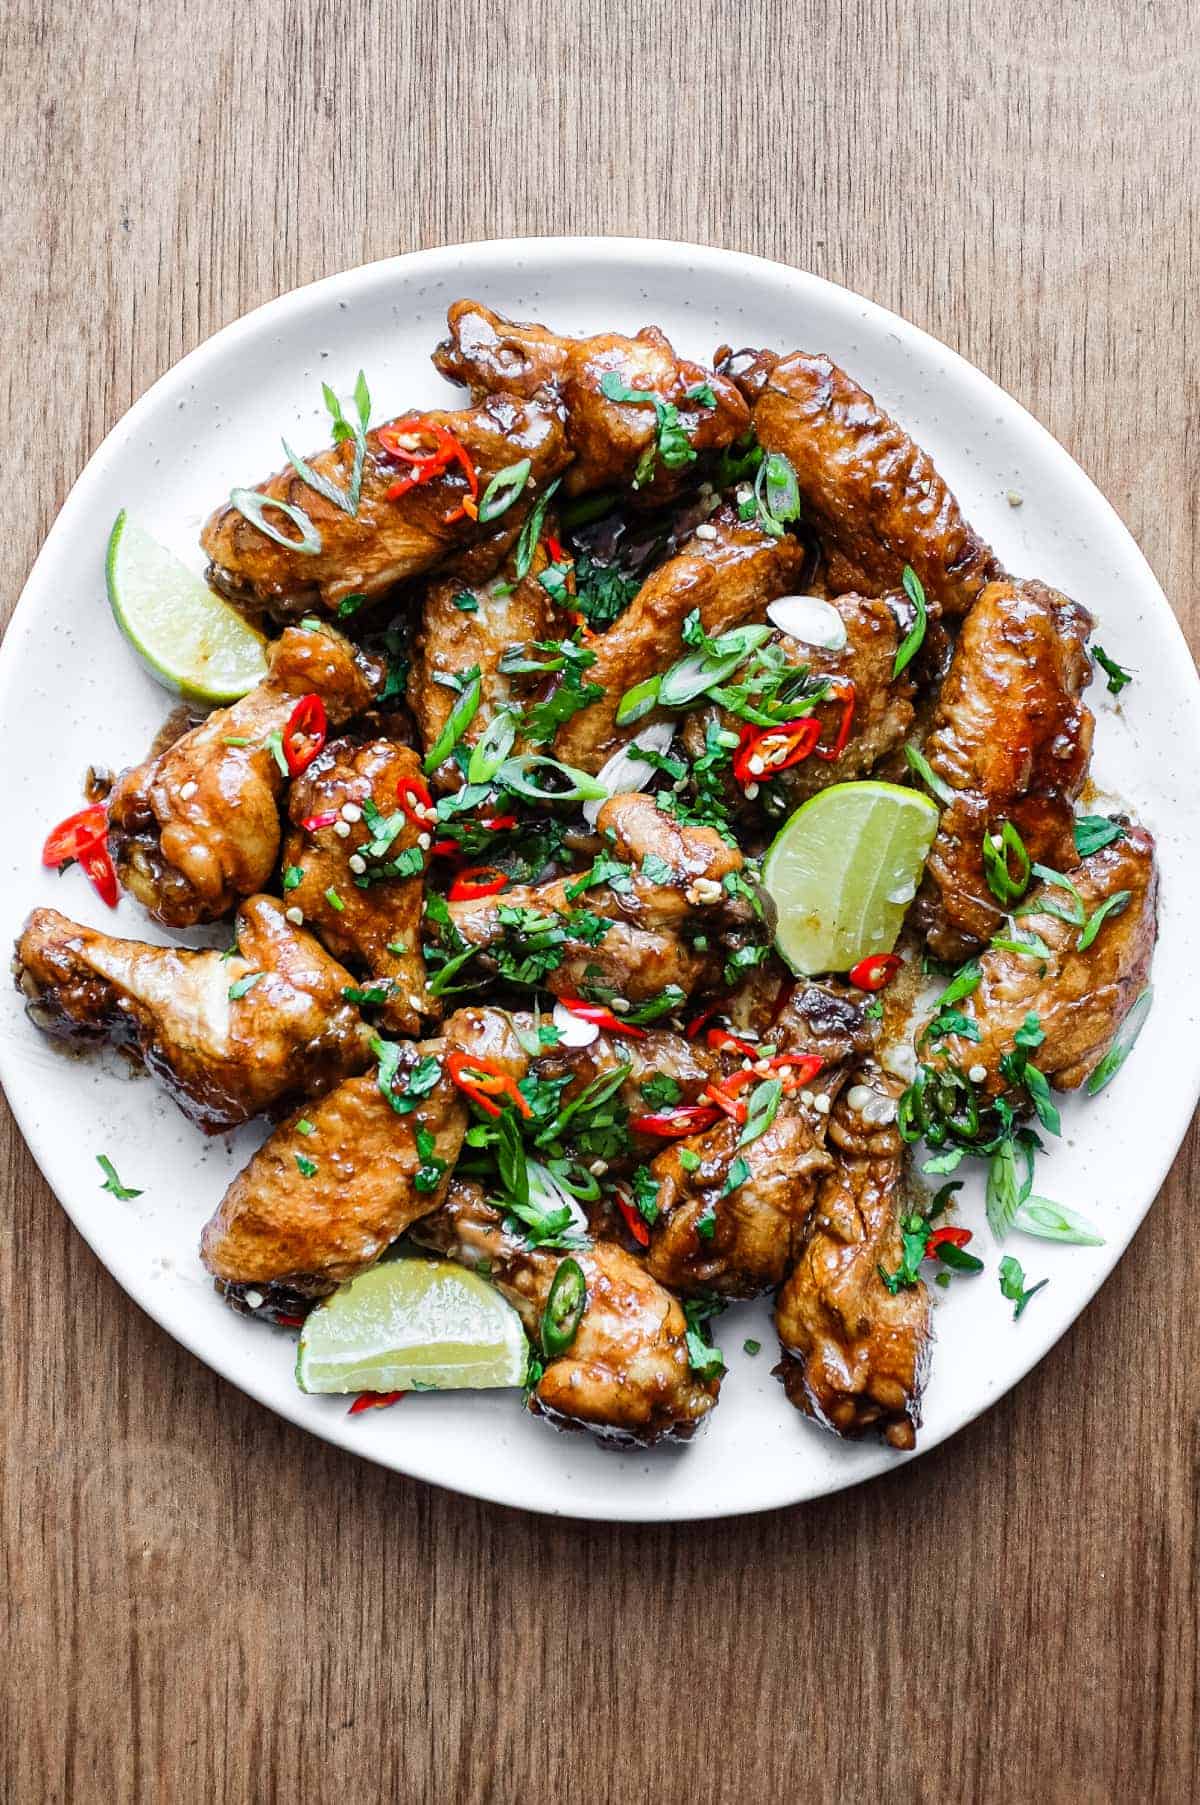 A platter of Indonesian chicken wings garnished with cilantro, chillies and spring onion alongside some lime wedges.